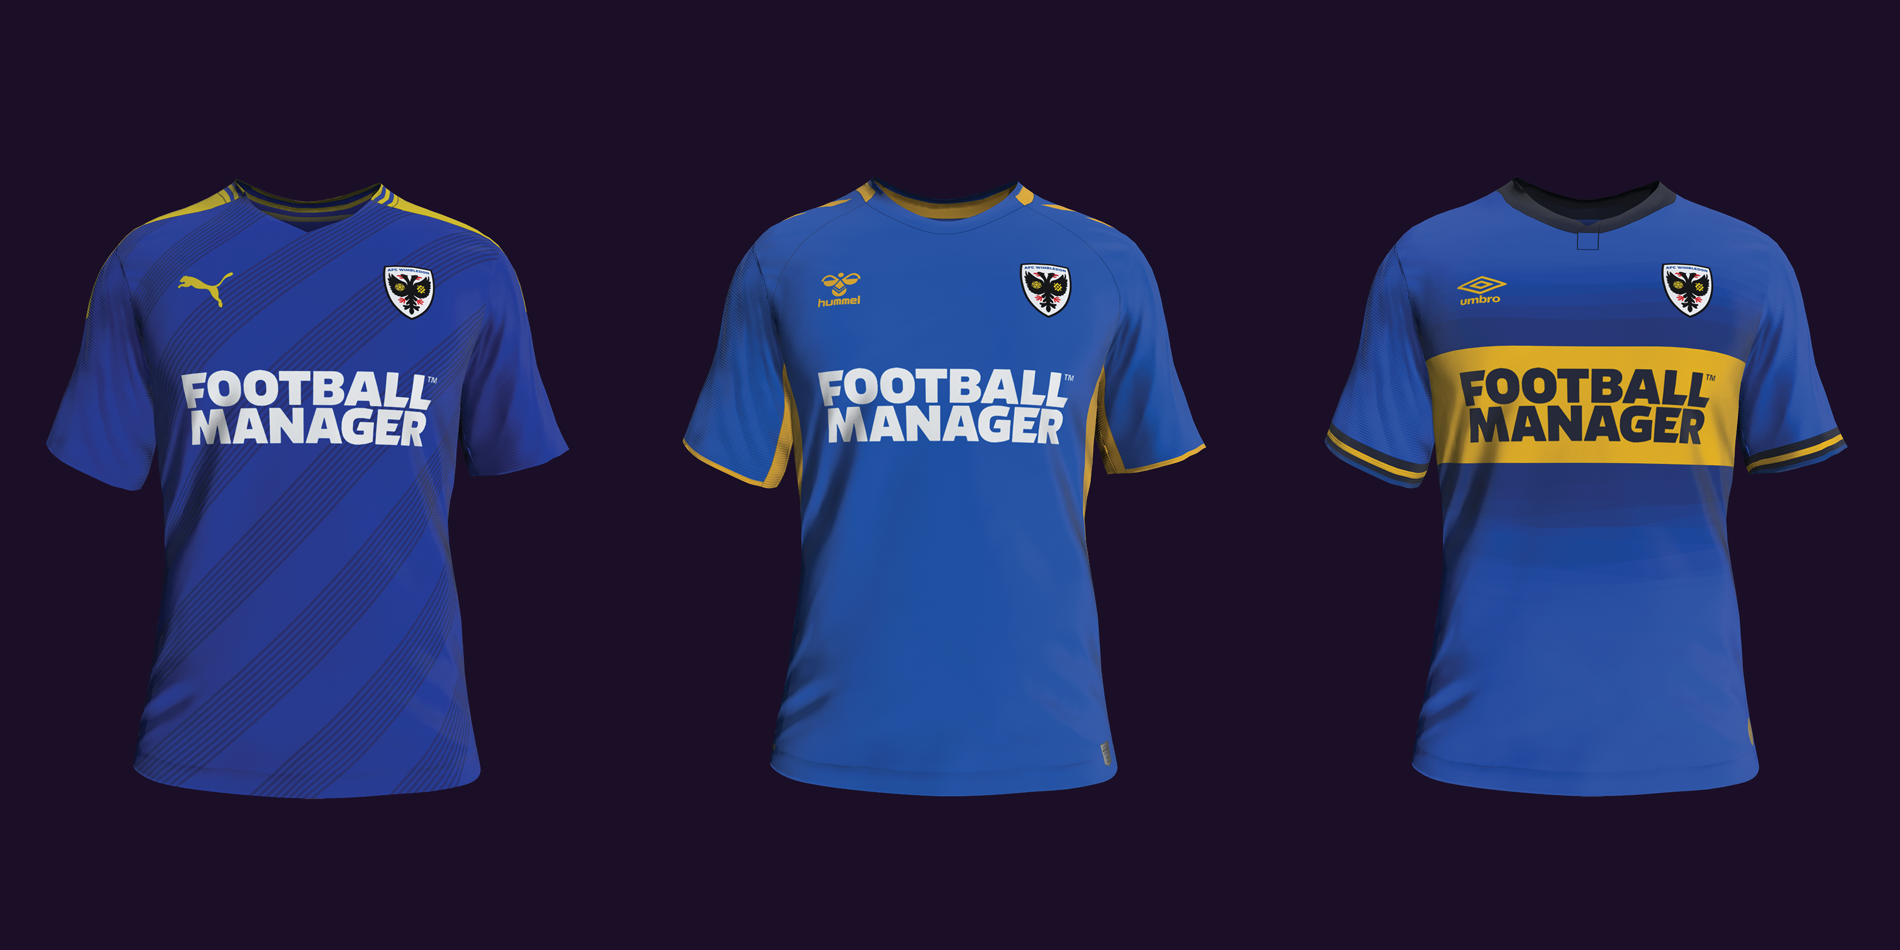 Sports Interactive Help Partners AFC Wimbledon to Don New Kit for Charity